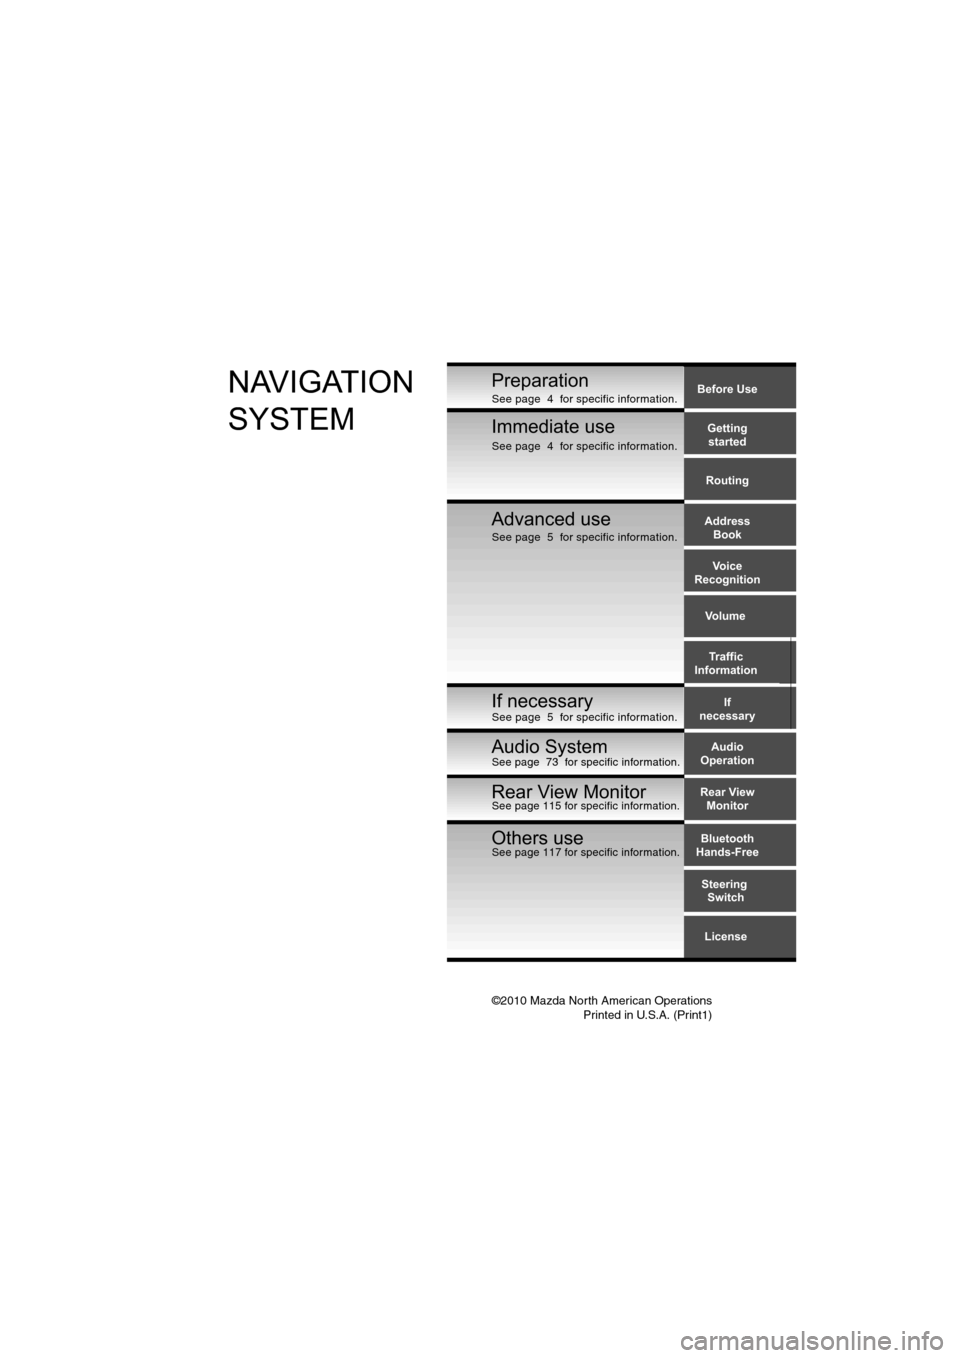 MAZDA MODEL 6 2013  Navigation Manual (in English) ©2010 Mazda North American OperationsPrinted in U.S.A. (Print1)
Before Use
Gettingstarted
Routing
Address Book
Voice 
Recognition
Volume
If
necessary Traffic
InformationPreparationNAVIGATION 
SYSTEM
